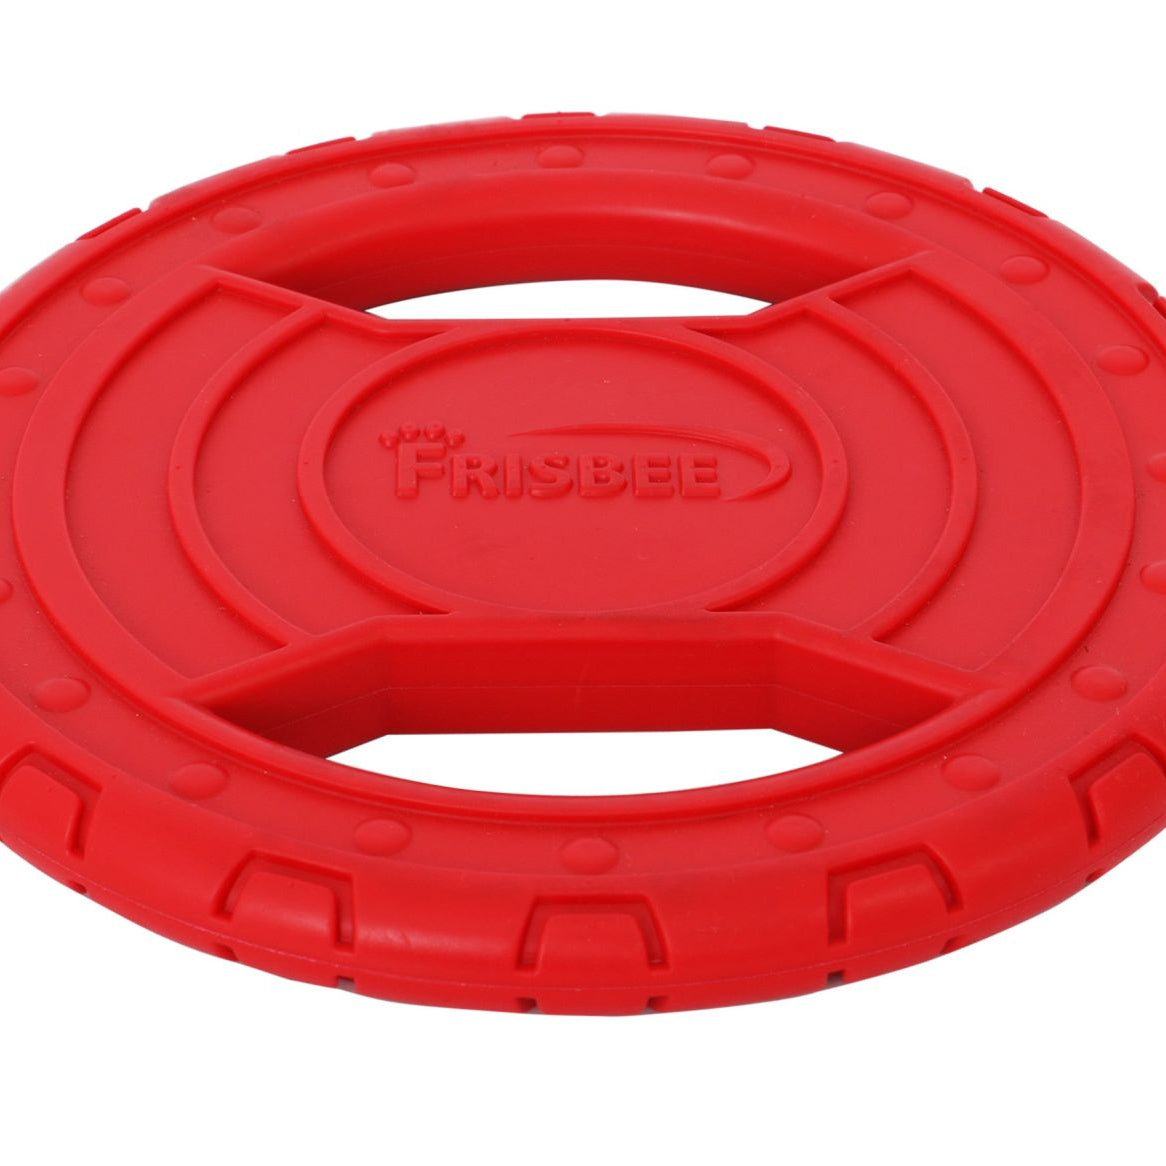 Frisbee Durable Chew And Fetch Teether Pet Toy